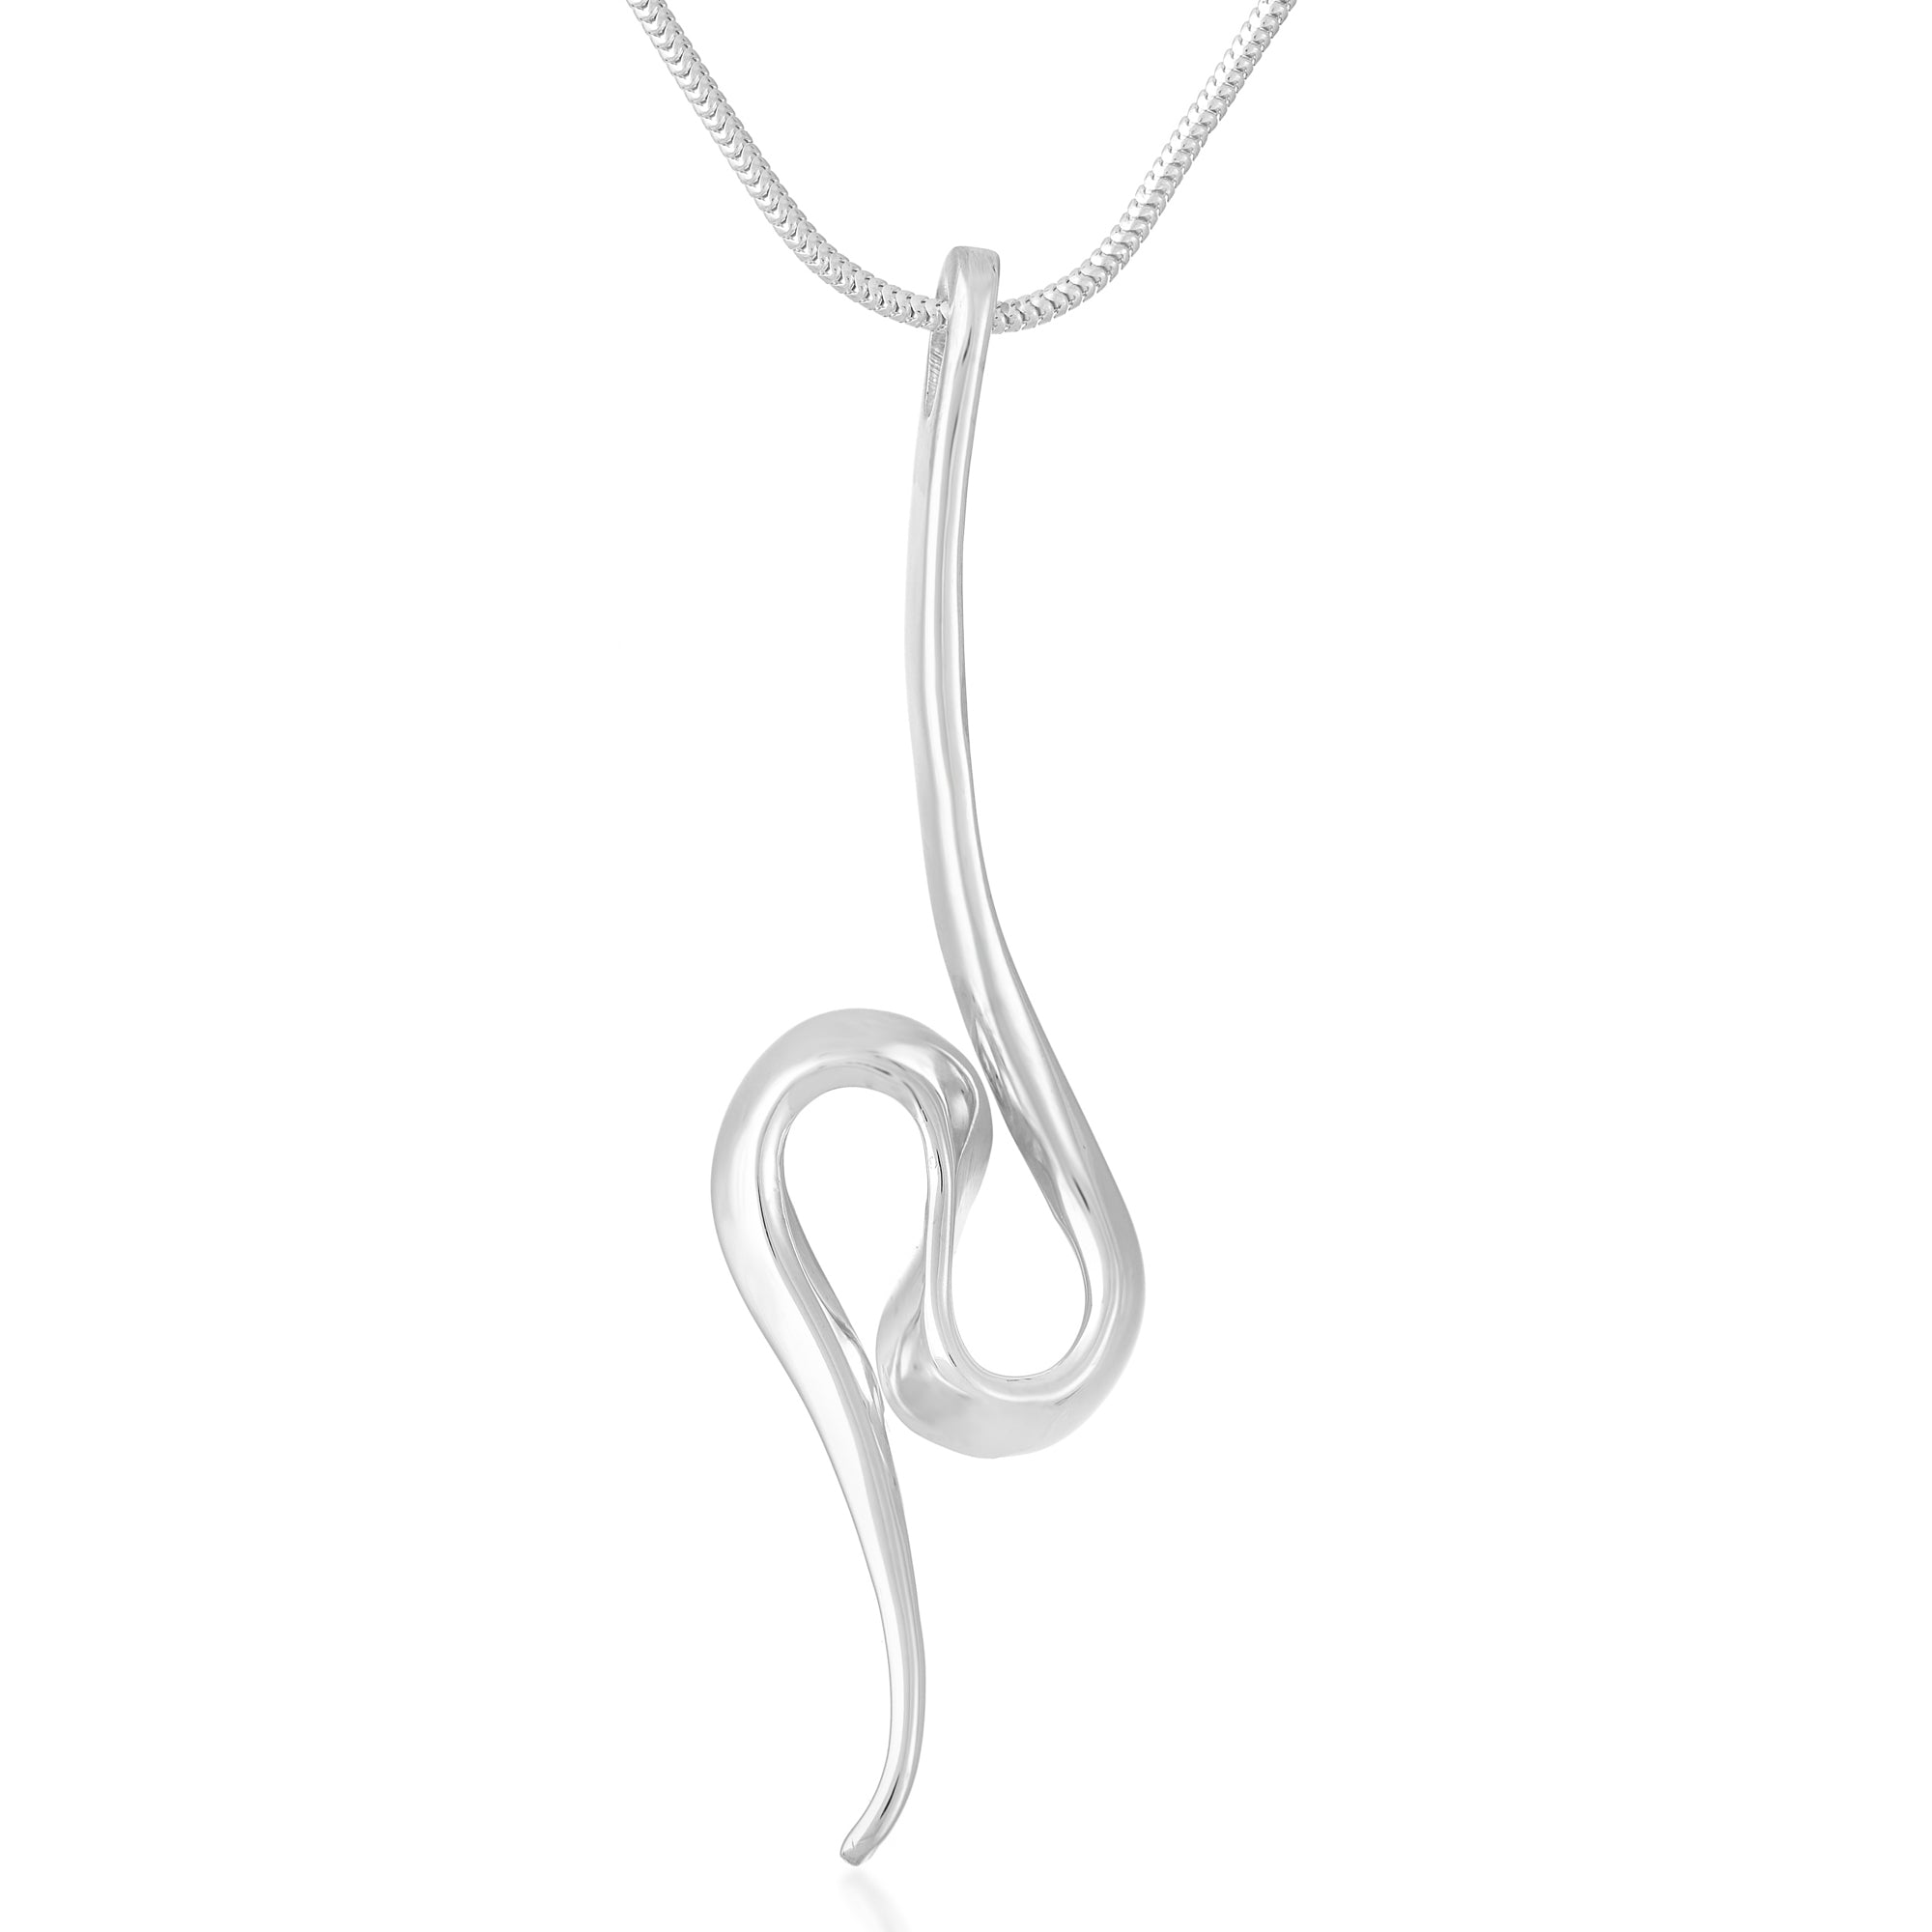 Handcrafted Silver Pendant with Figure of Eight Design